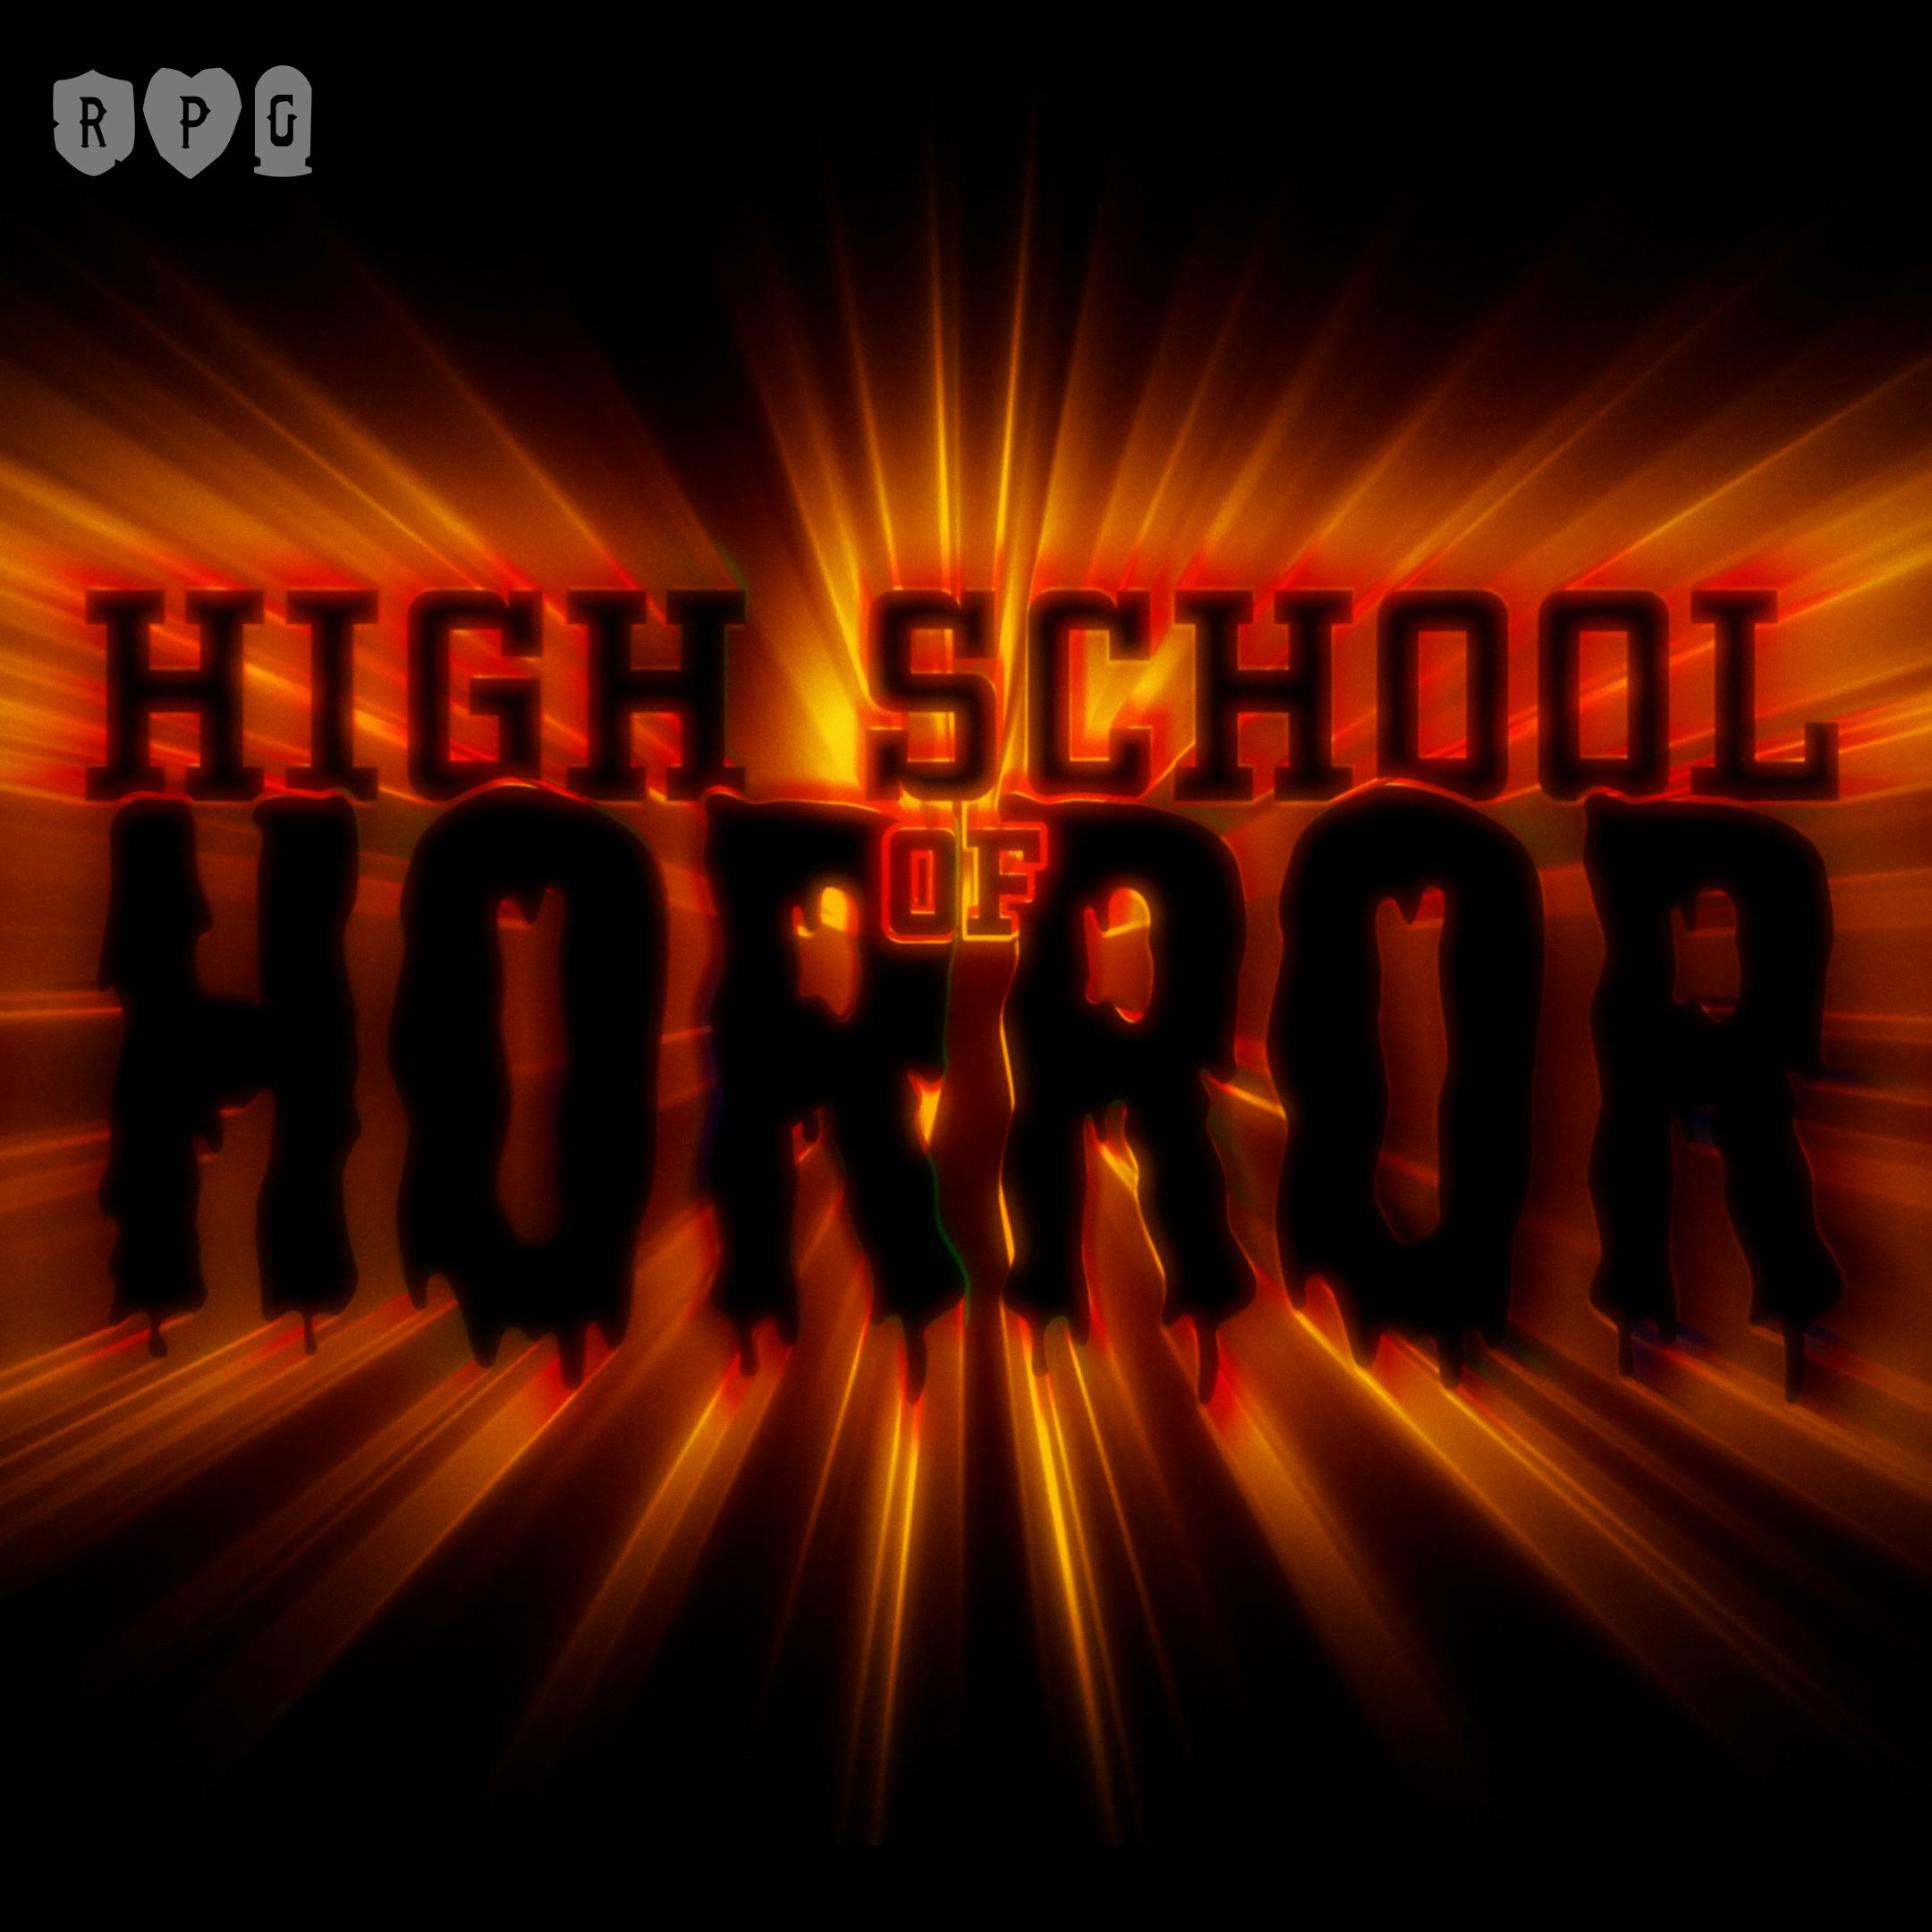 High-School of Horror :: Detention of Death